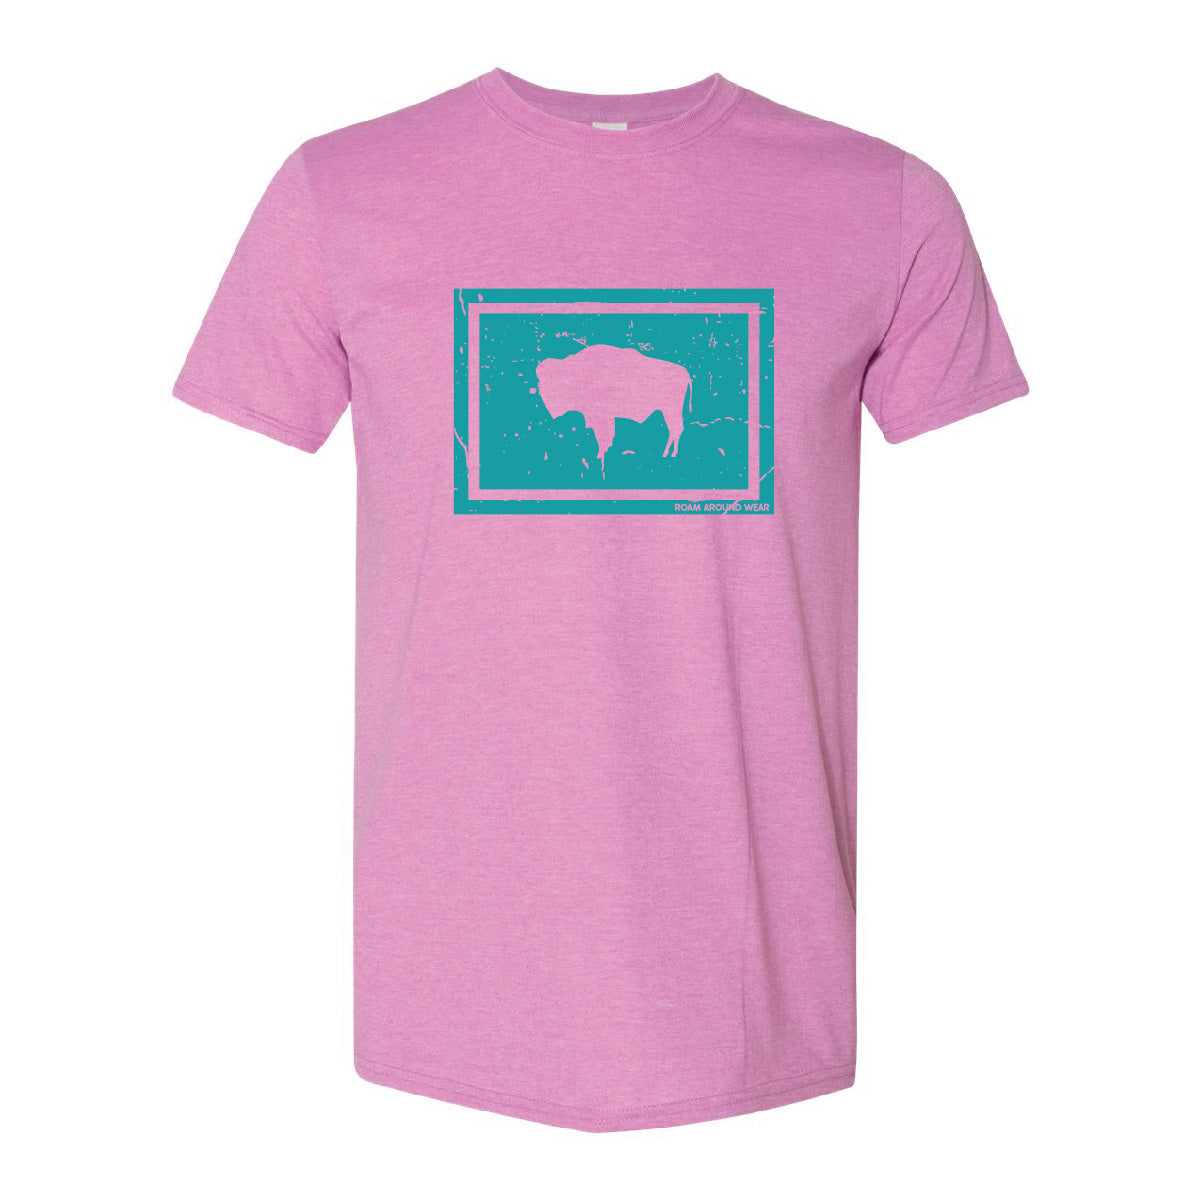 Spring tee. Wyoming bison tee. Western bison t-shirt. Unisex tee. Women's pink tee with teal bison. Roam Around Wear is a Wyoming t-shirt company based in Gillette, Wyoming